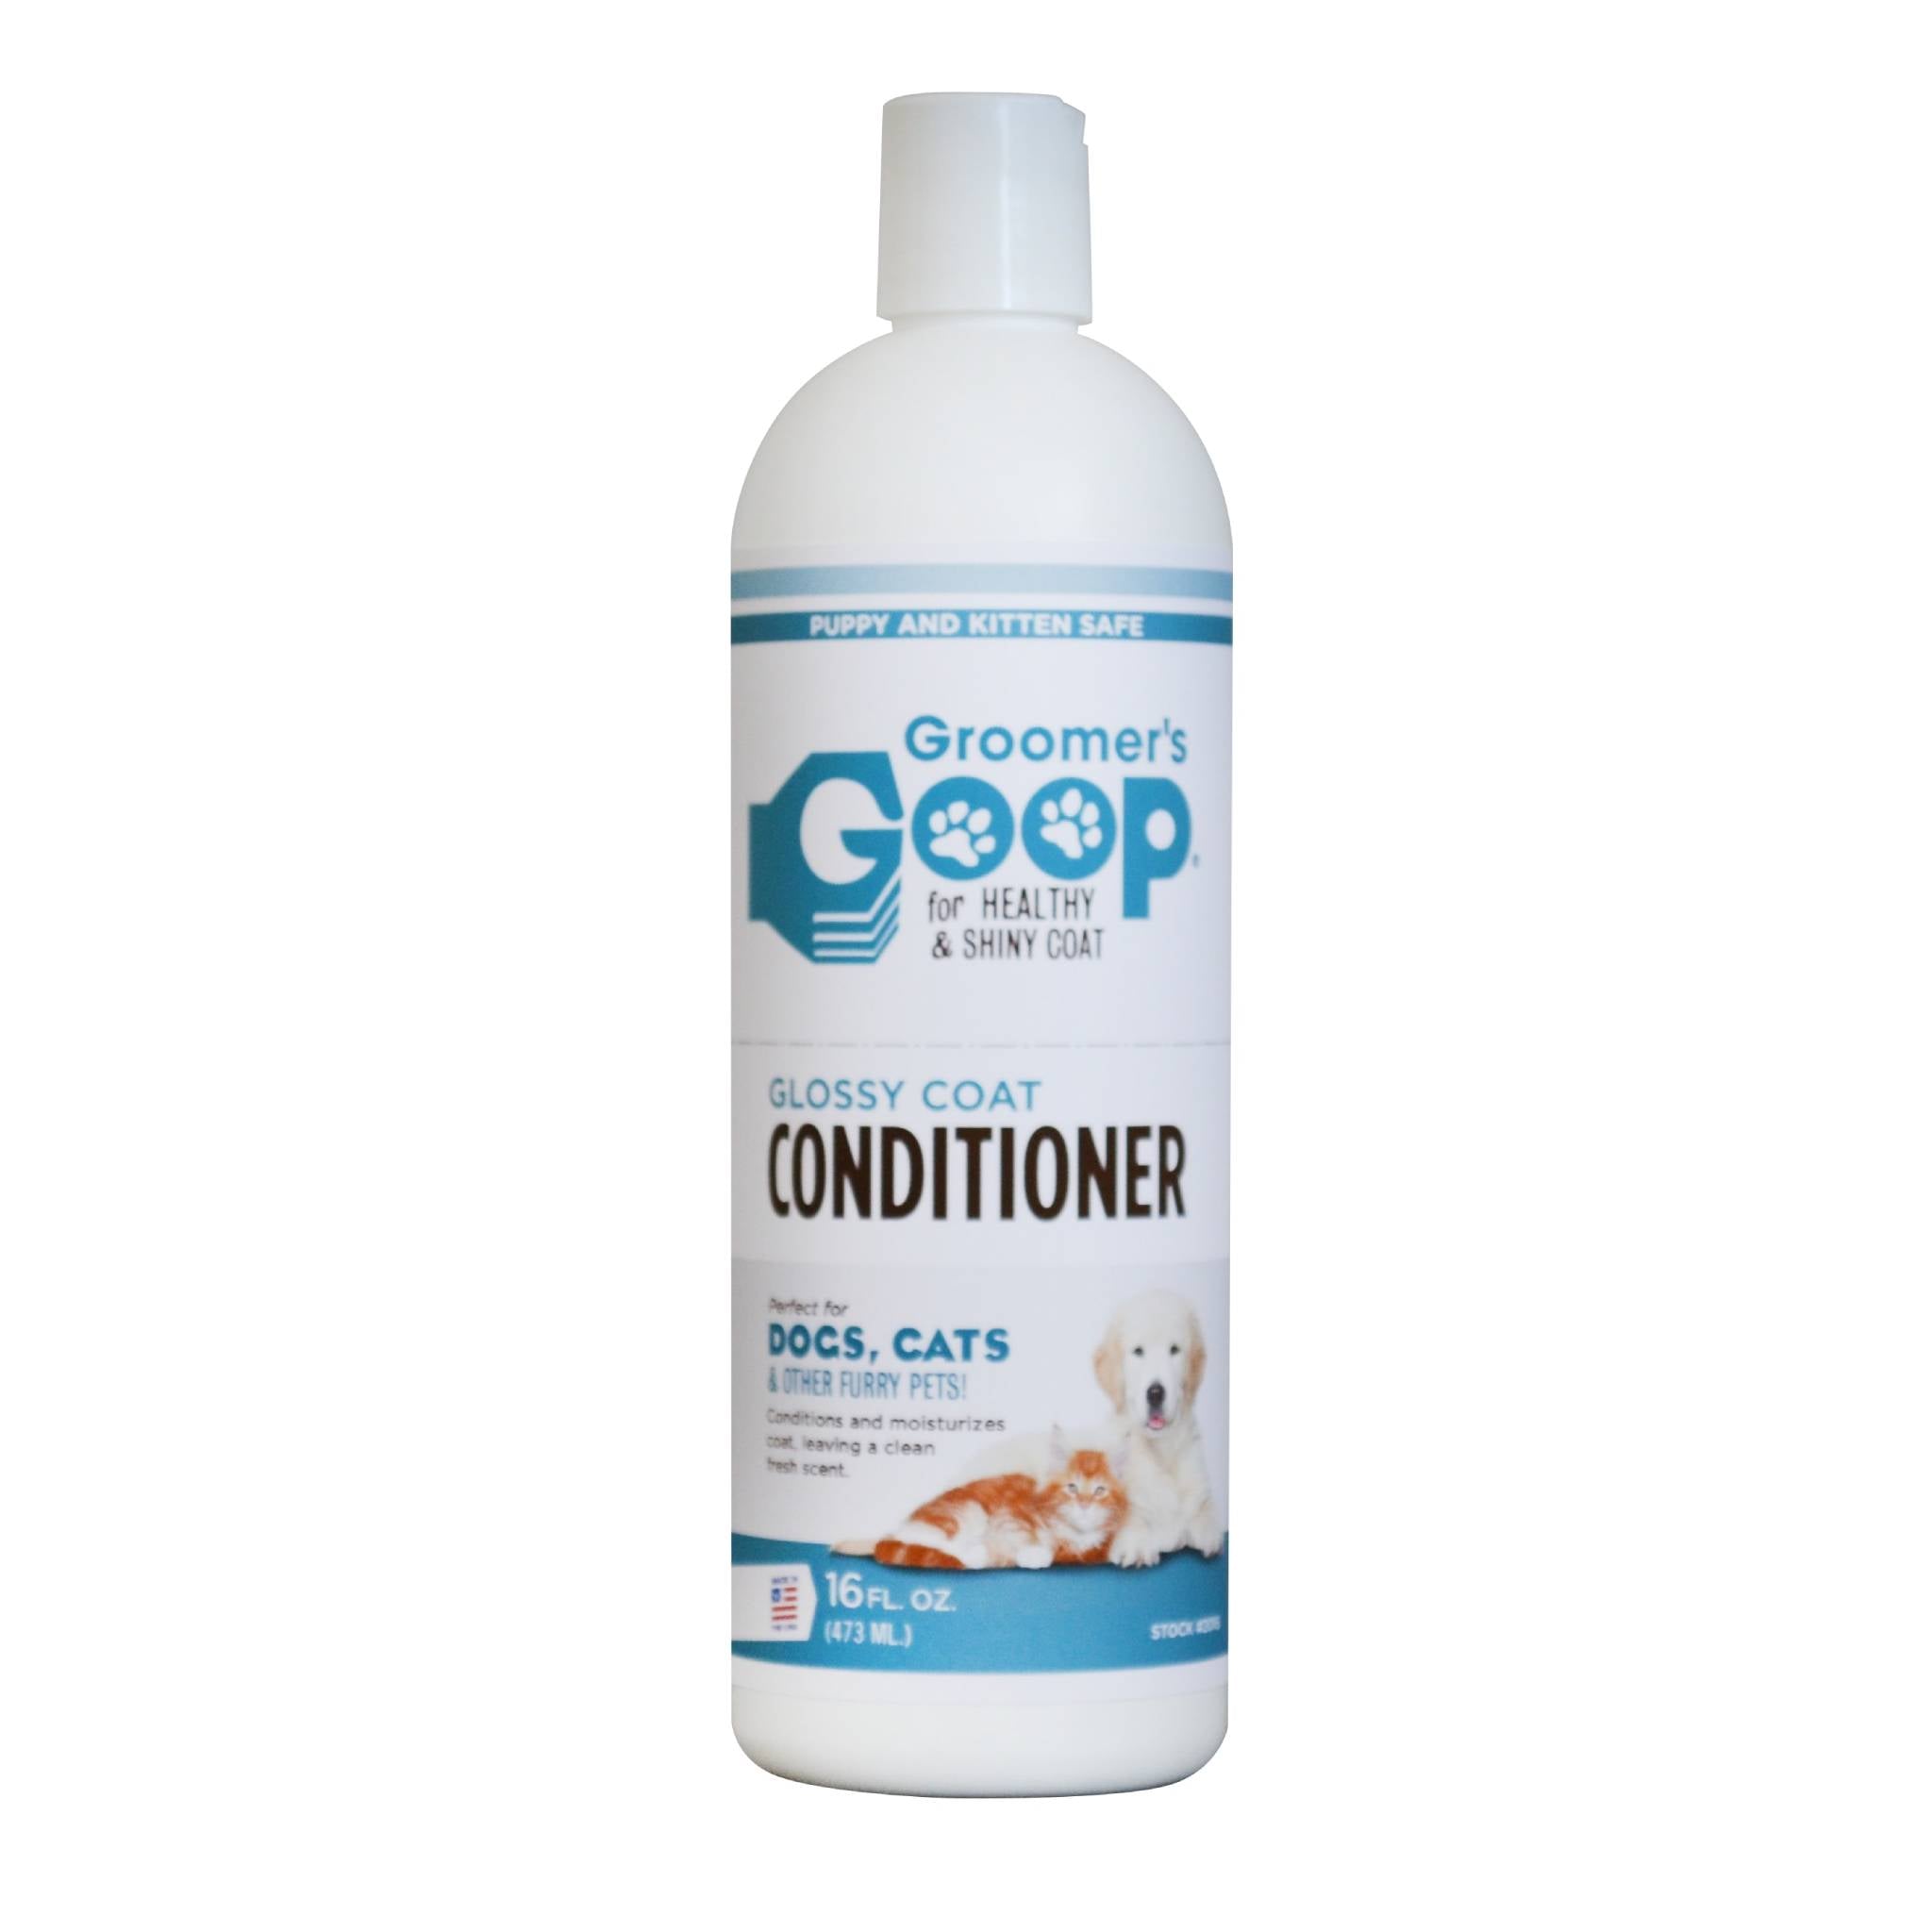 Groomers Goop Glossy Coat Conditioner for Pets, 473 ml